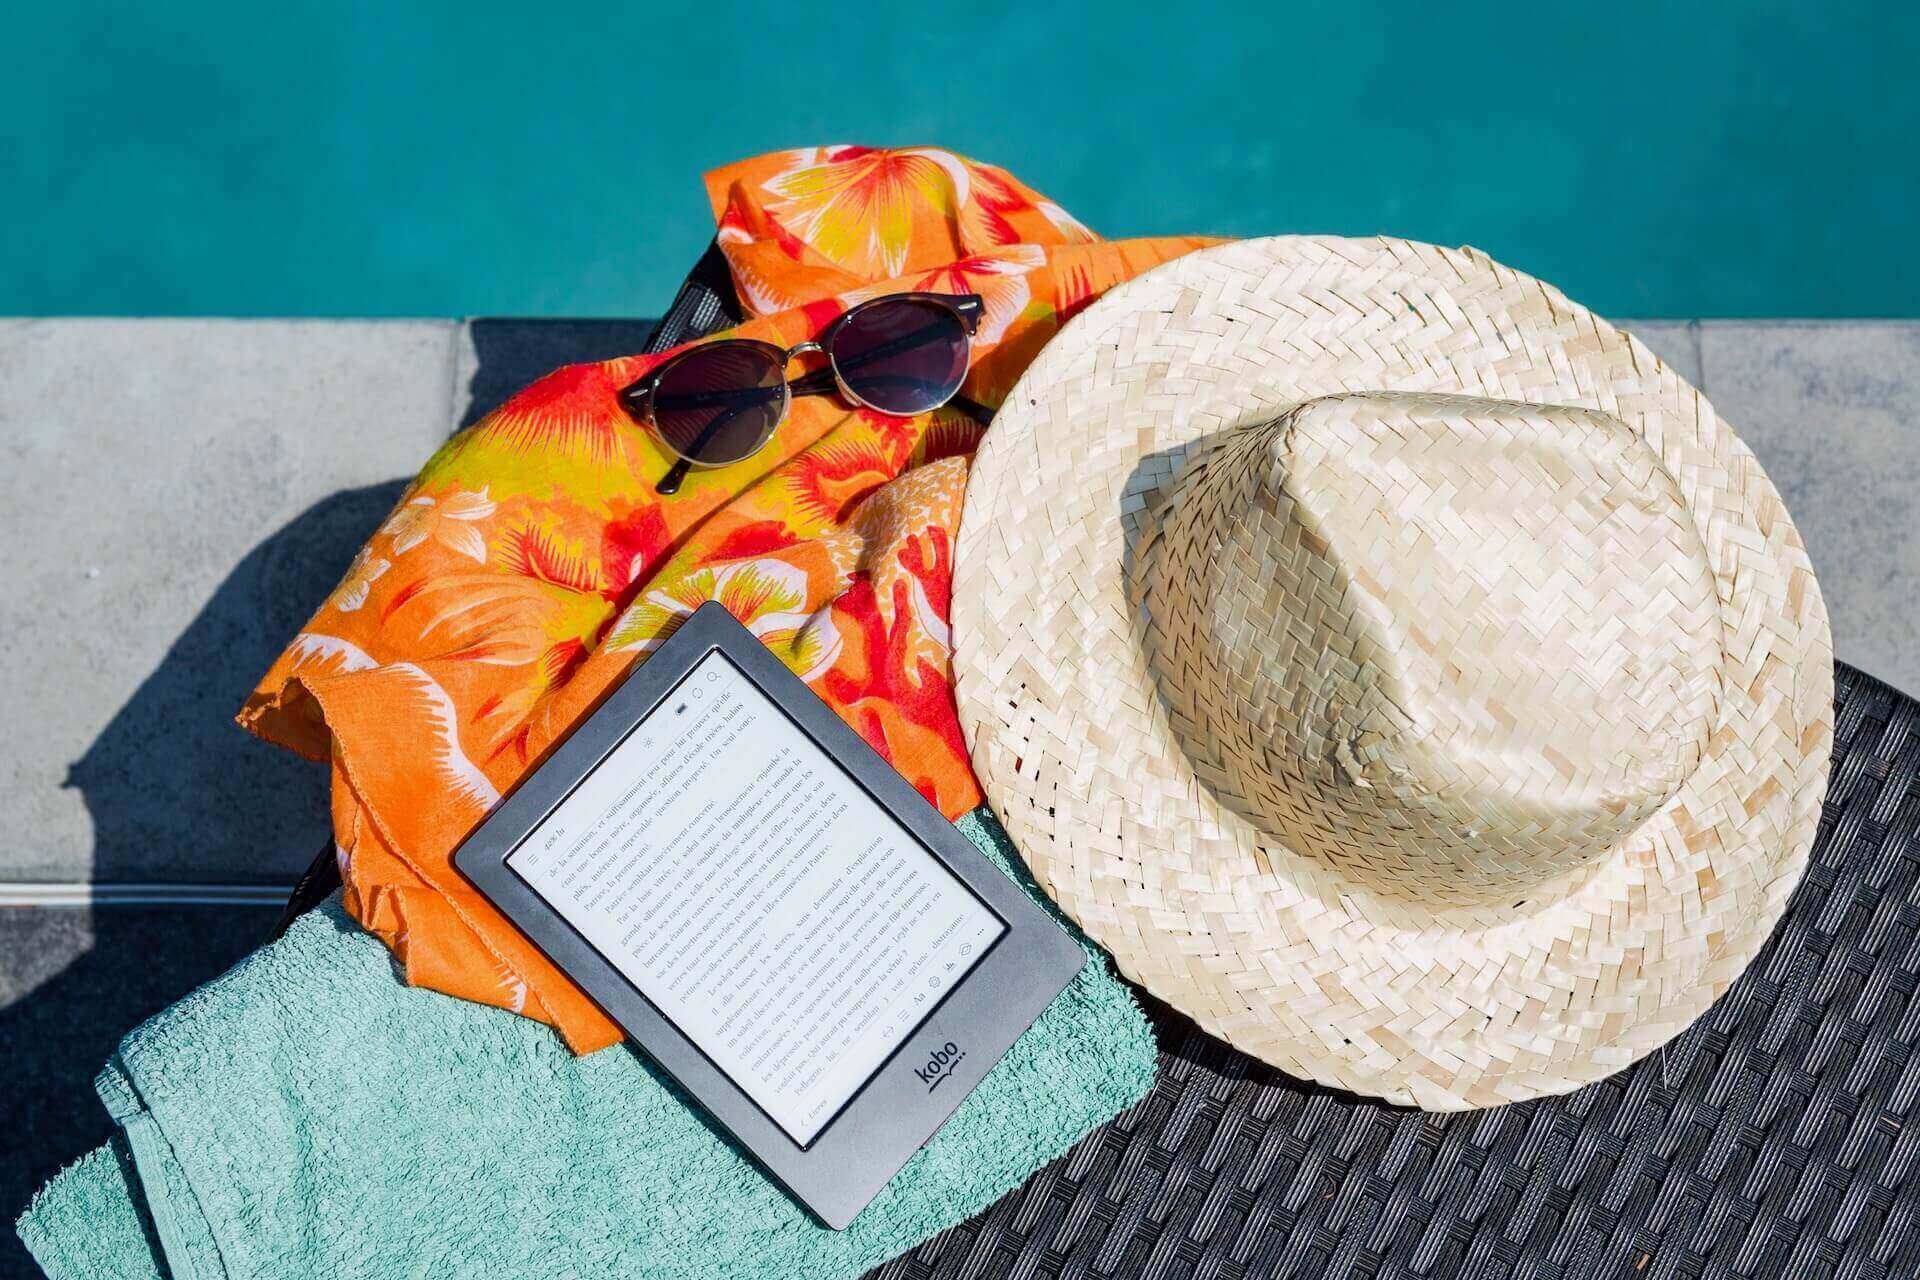 Kindle, a hat, and sunglasses on towels